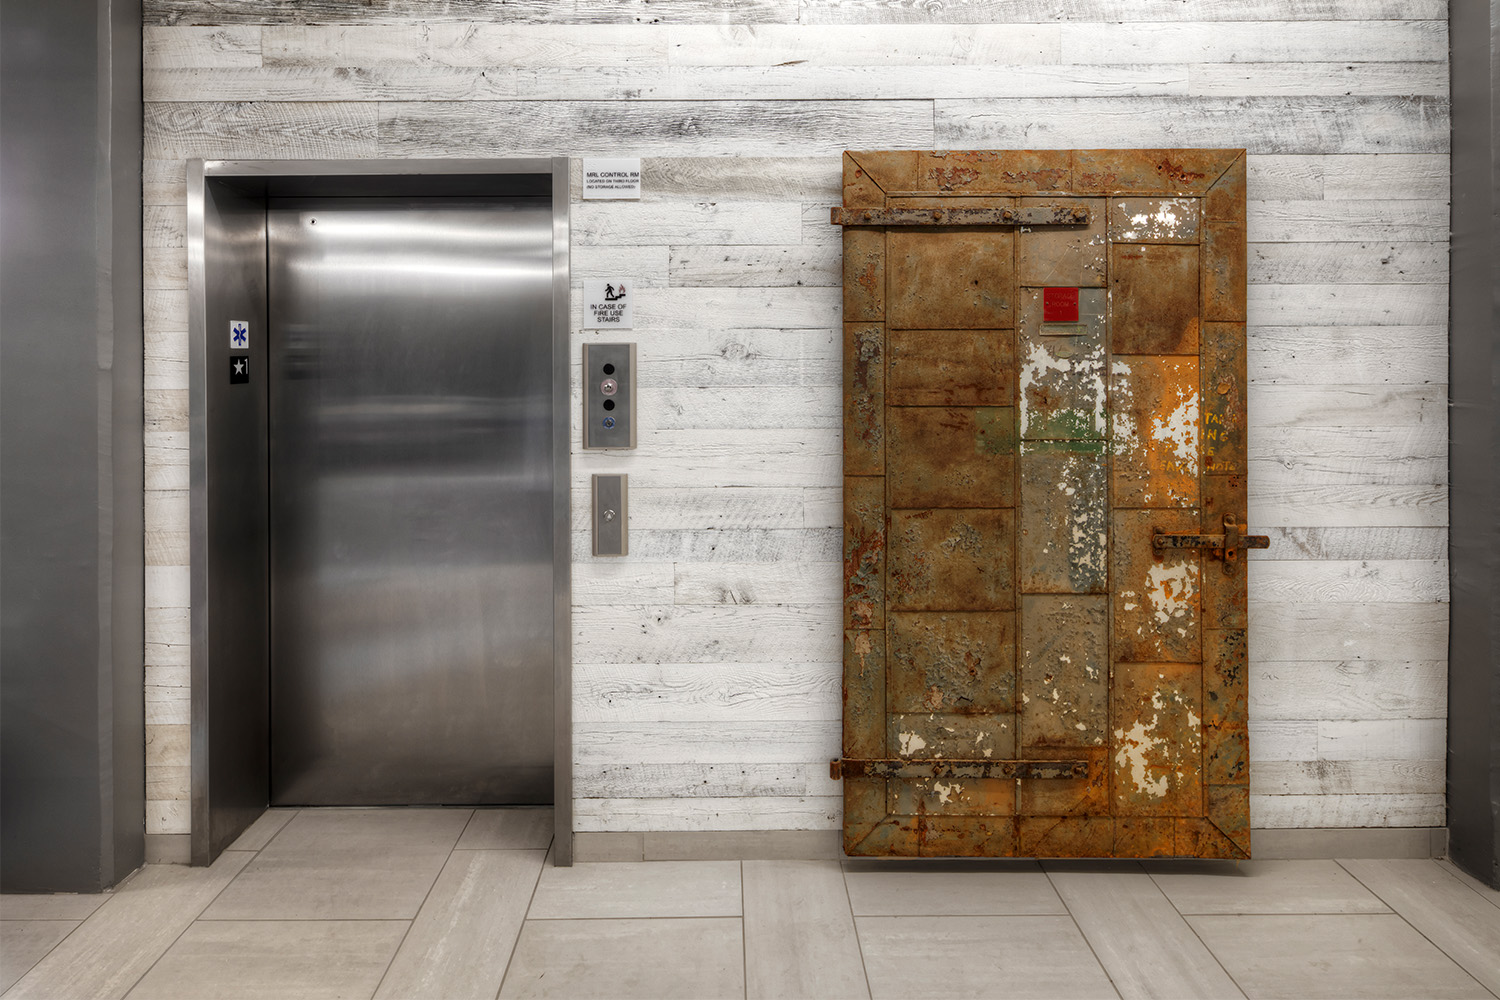 Wall with stylish grey oakwood paneling, an elevator shaft to the left, and a rustic metal door to the right